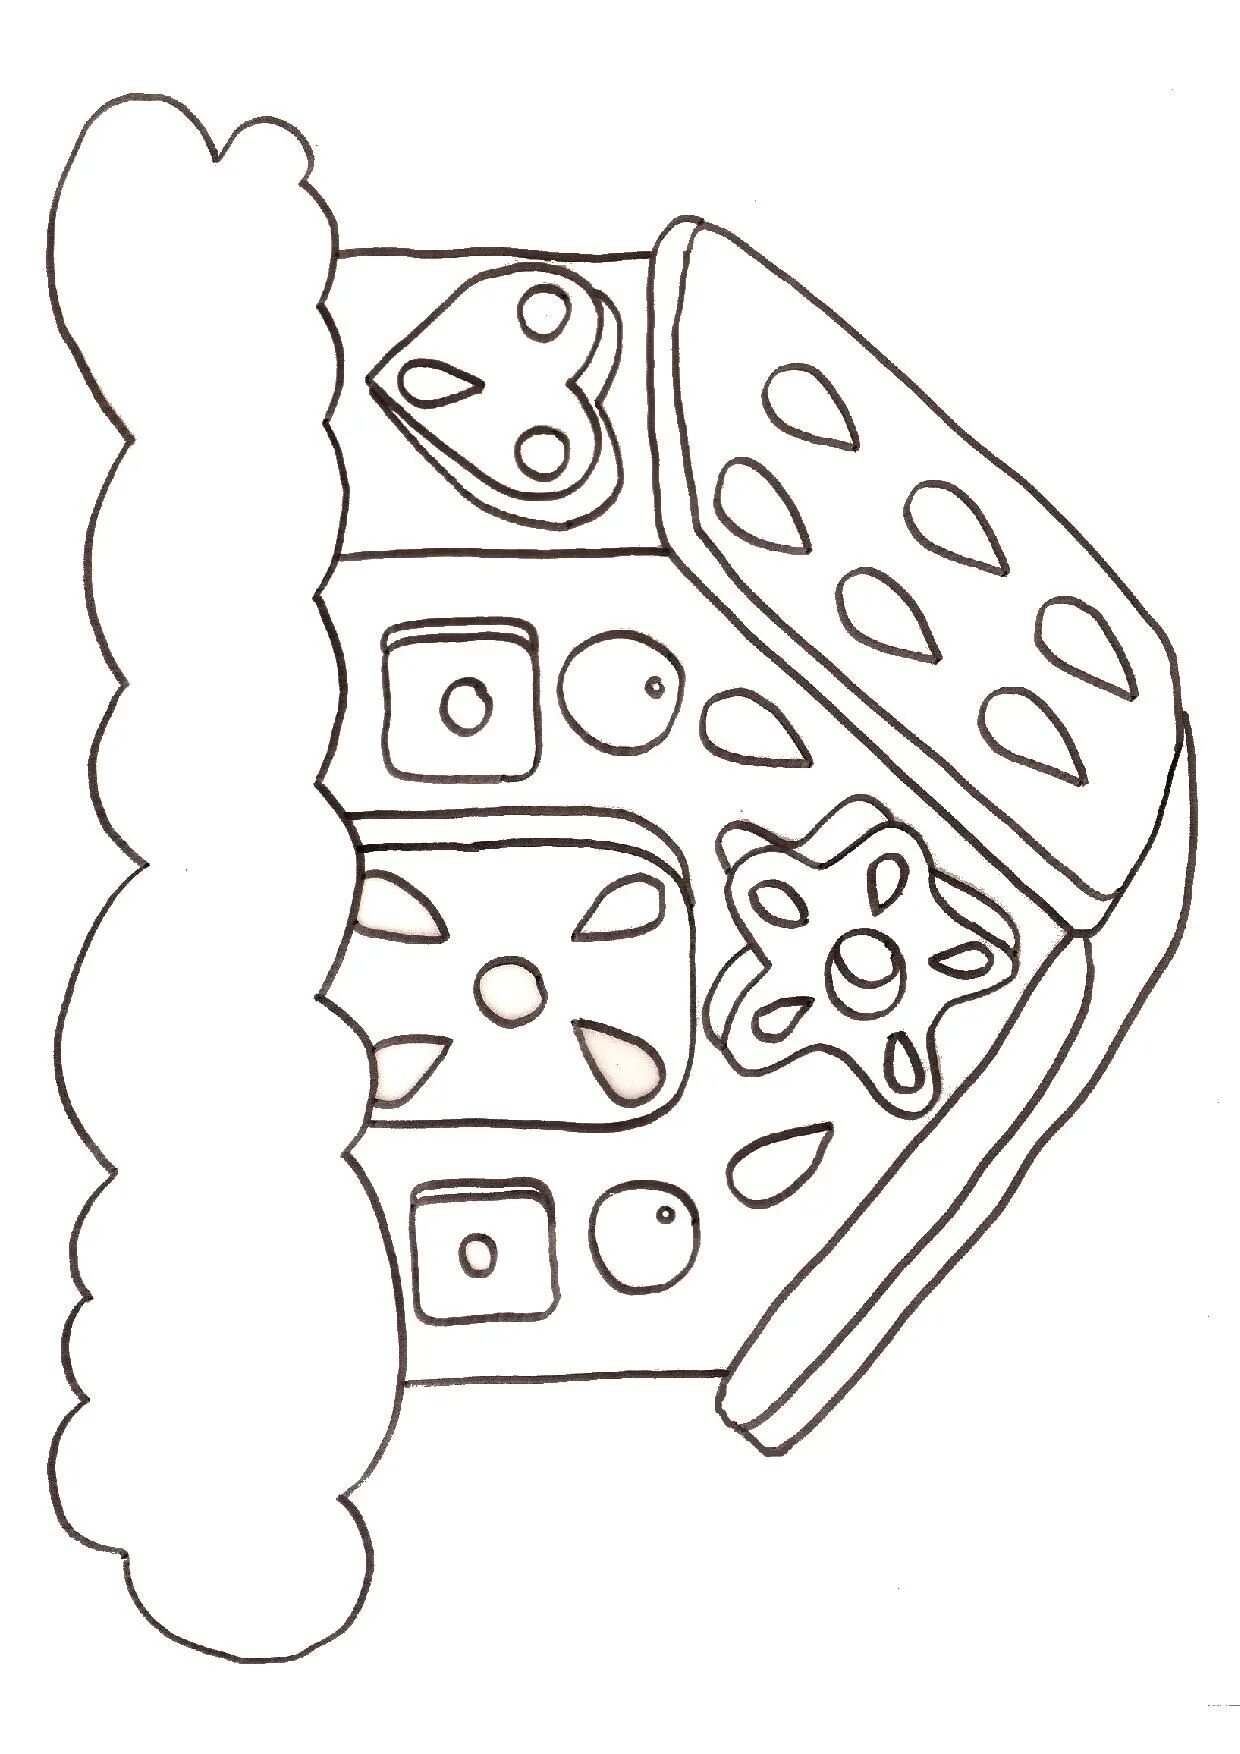 Great beginner mitten house coloring page